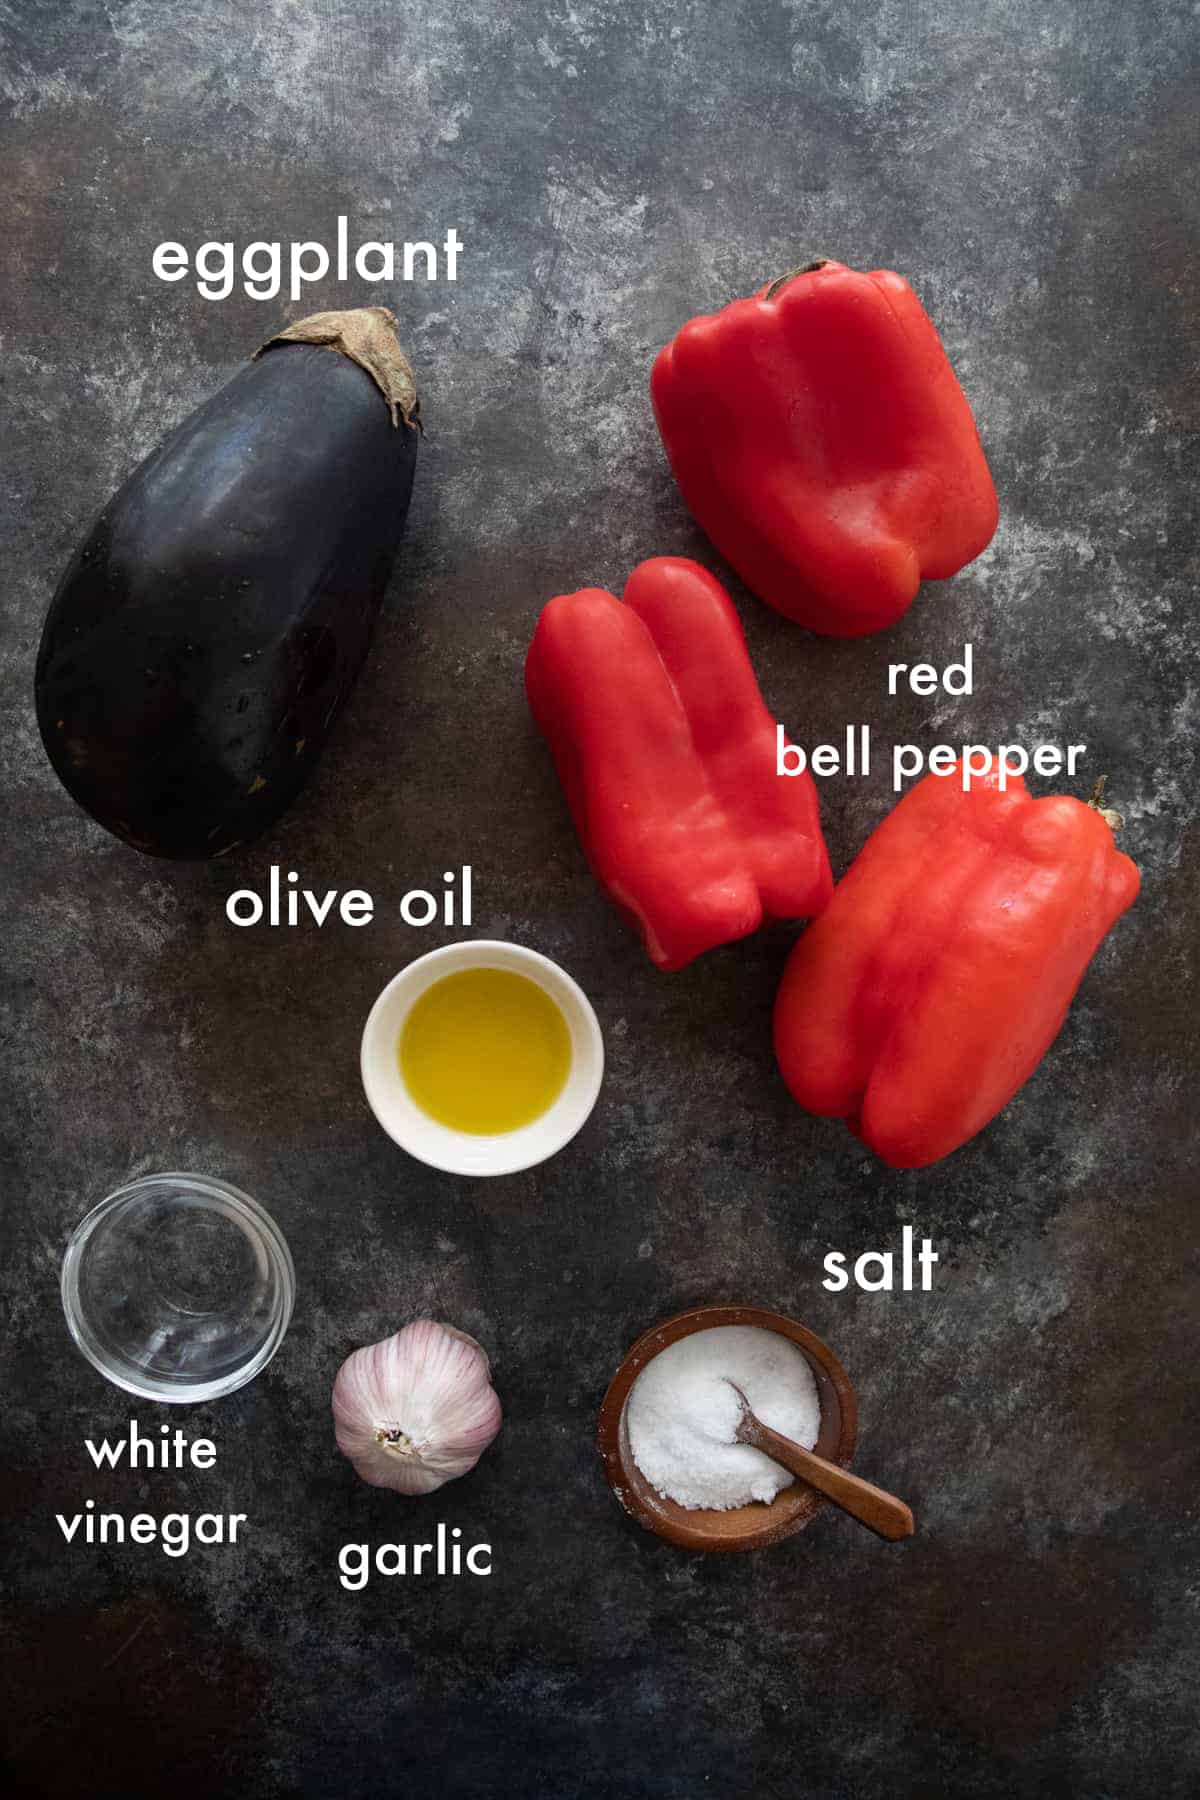 To make this recipe you need red bell pepper, eggplant, olive oil, salt, garlic and white vinegar.